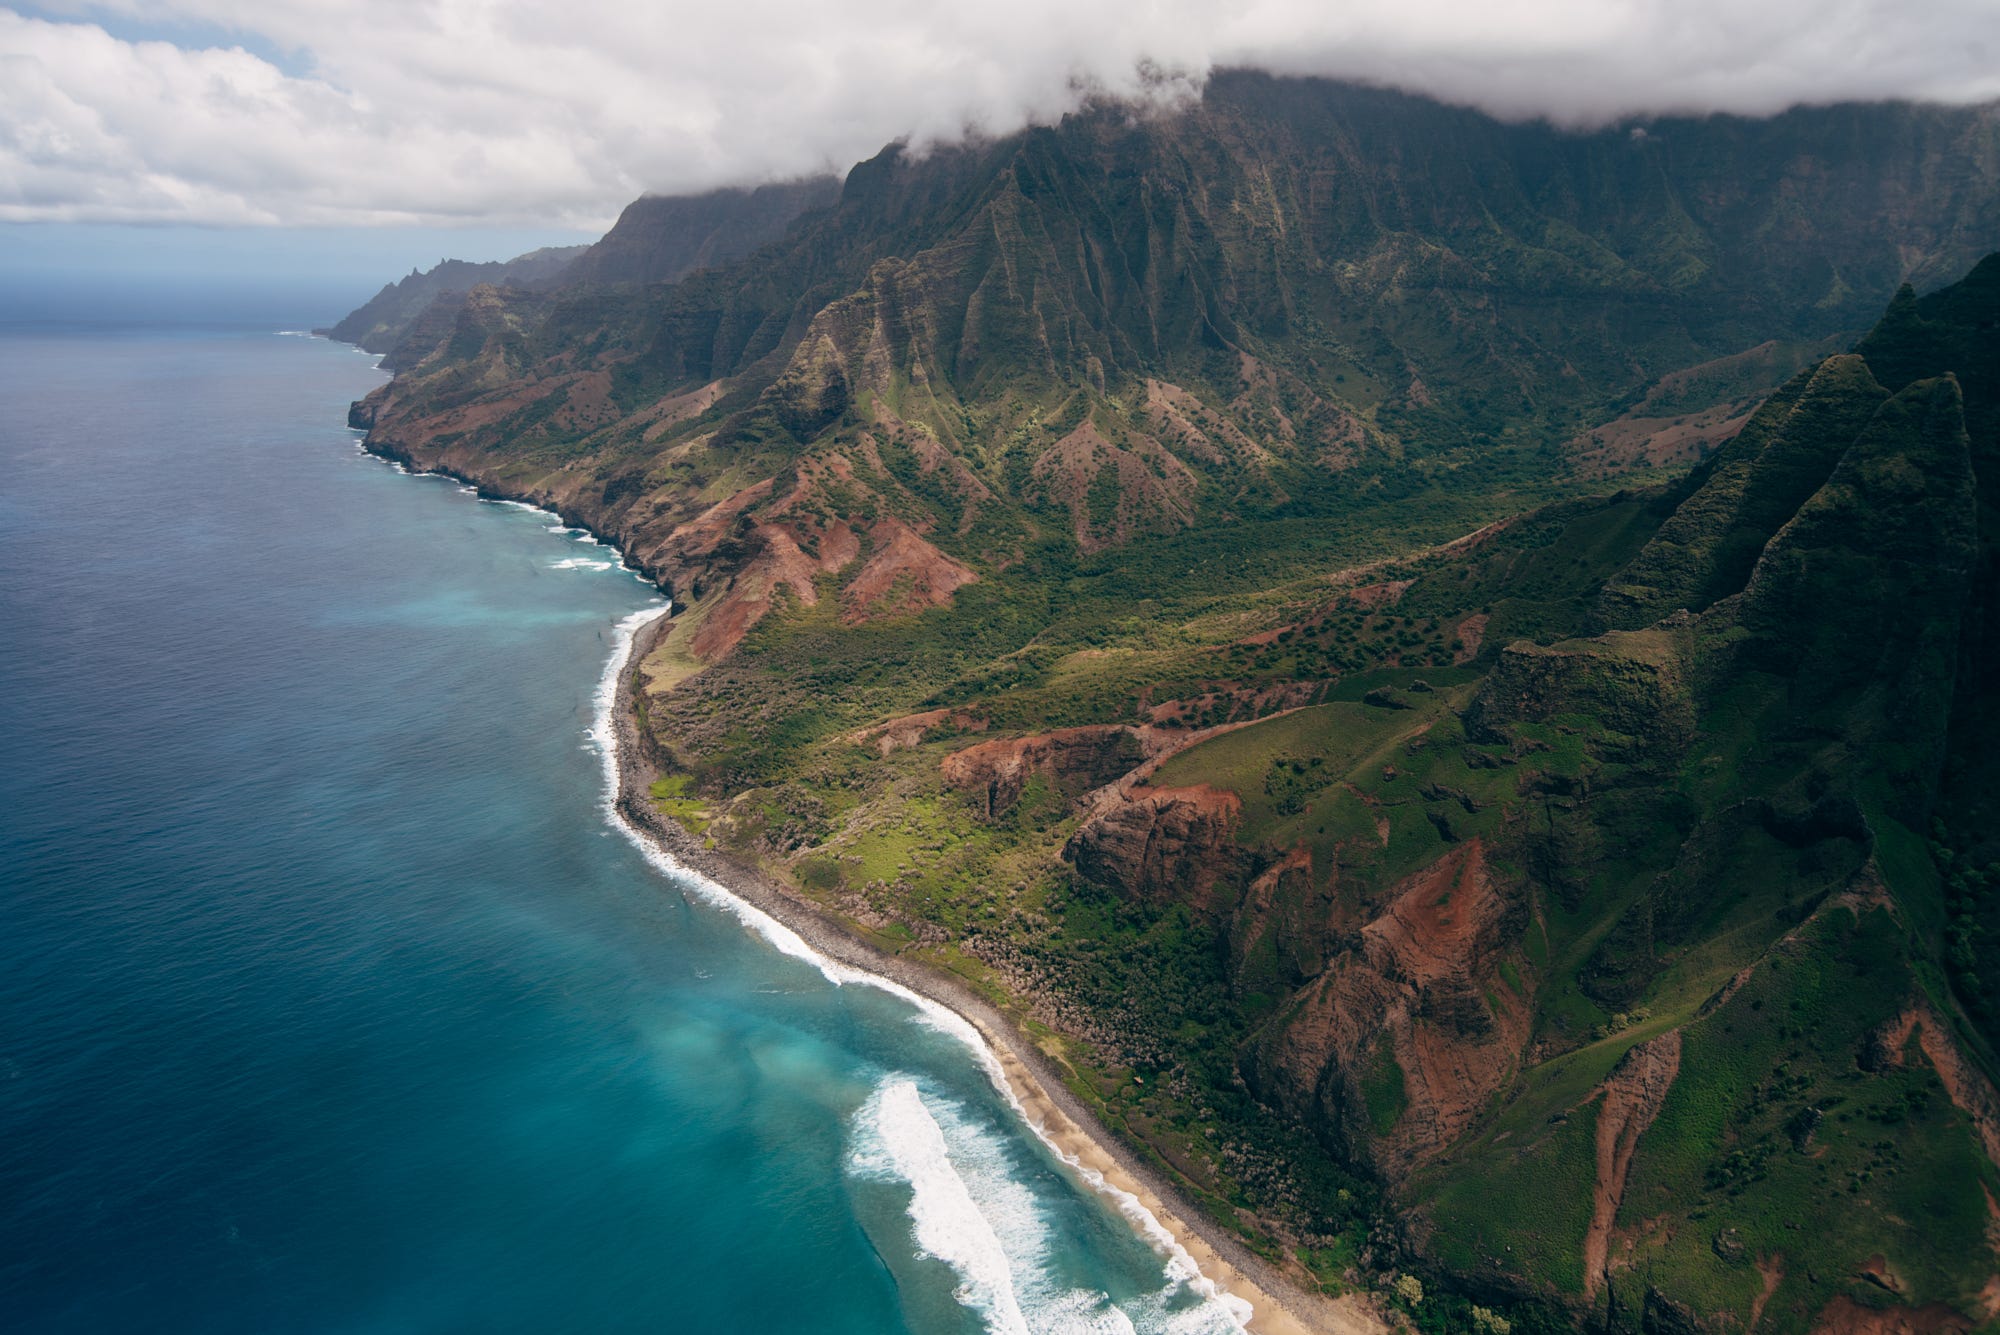 General 2000x1335 nature Hawaii landscape mountains clouds water aerial view Jurassic Park